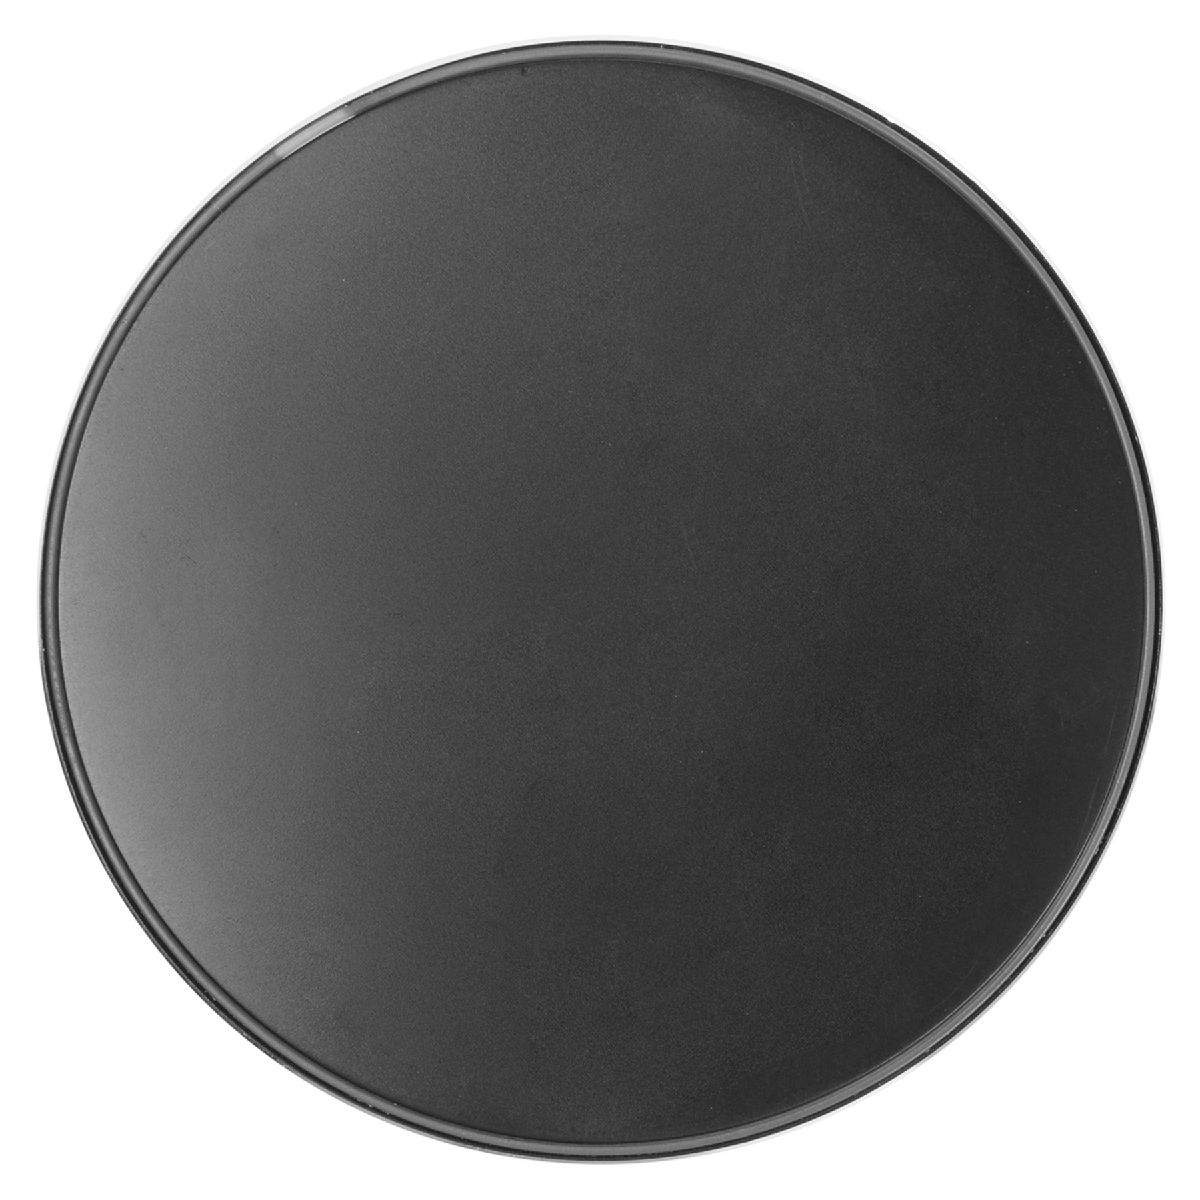 Black Qi Bevel 10W Wireless Charger